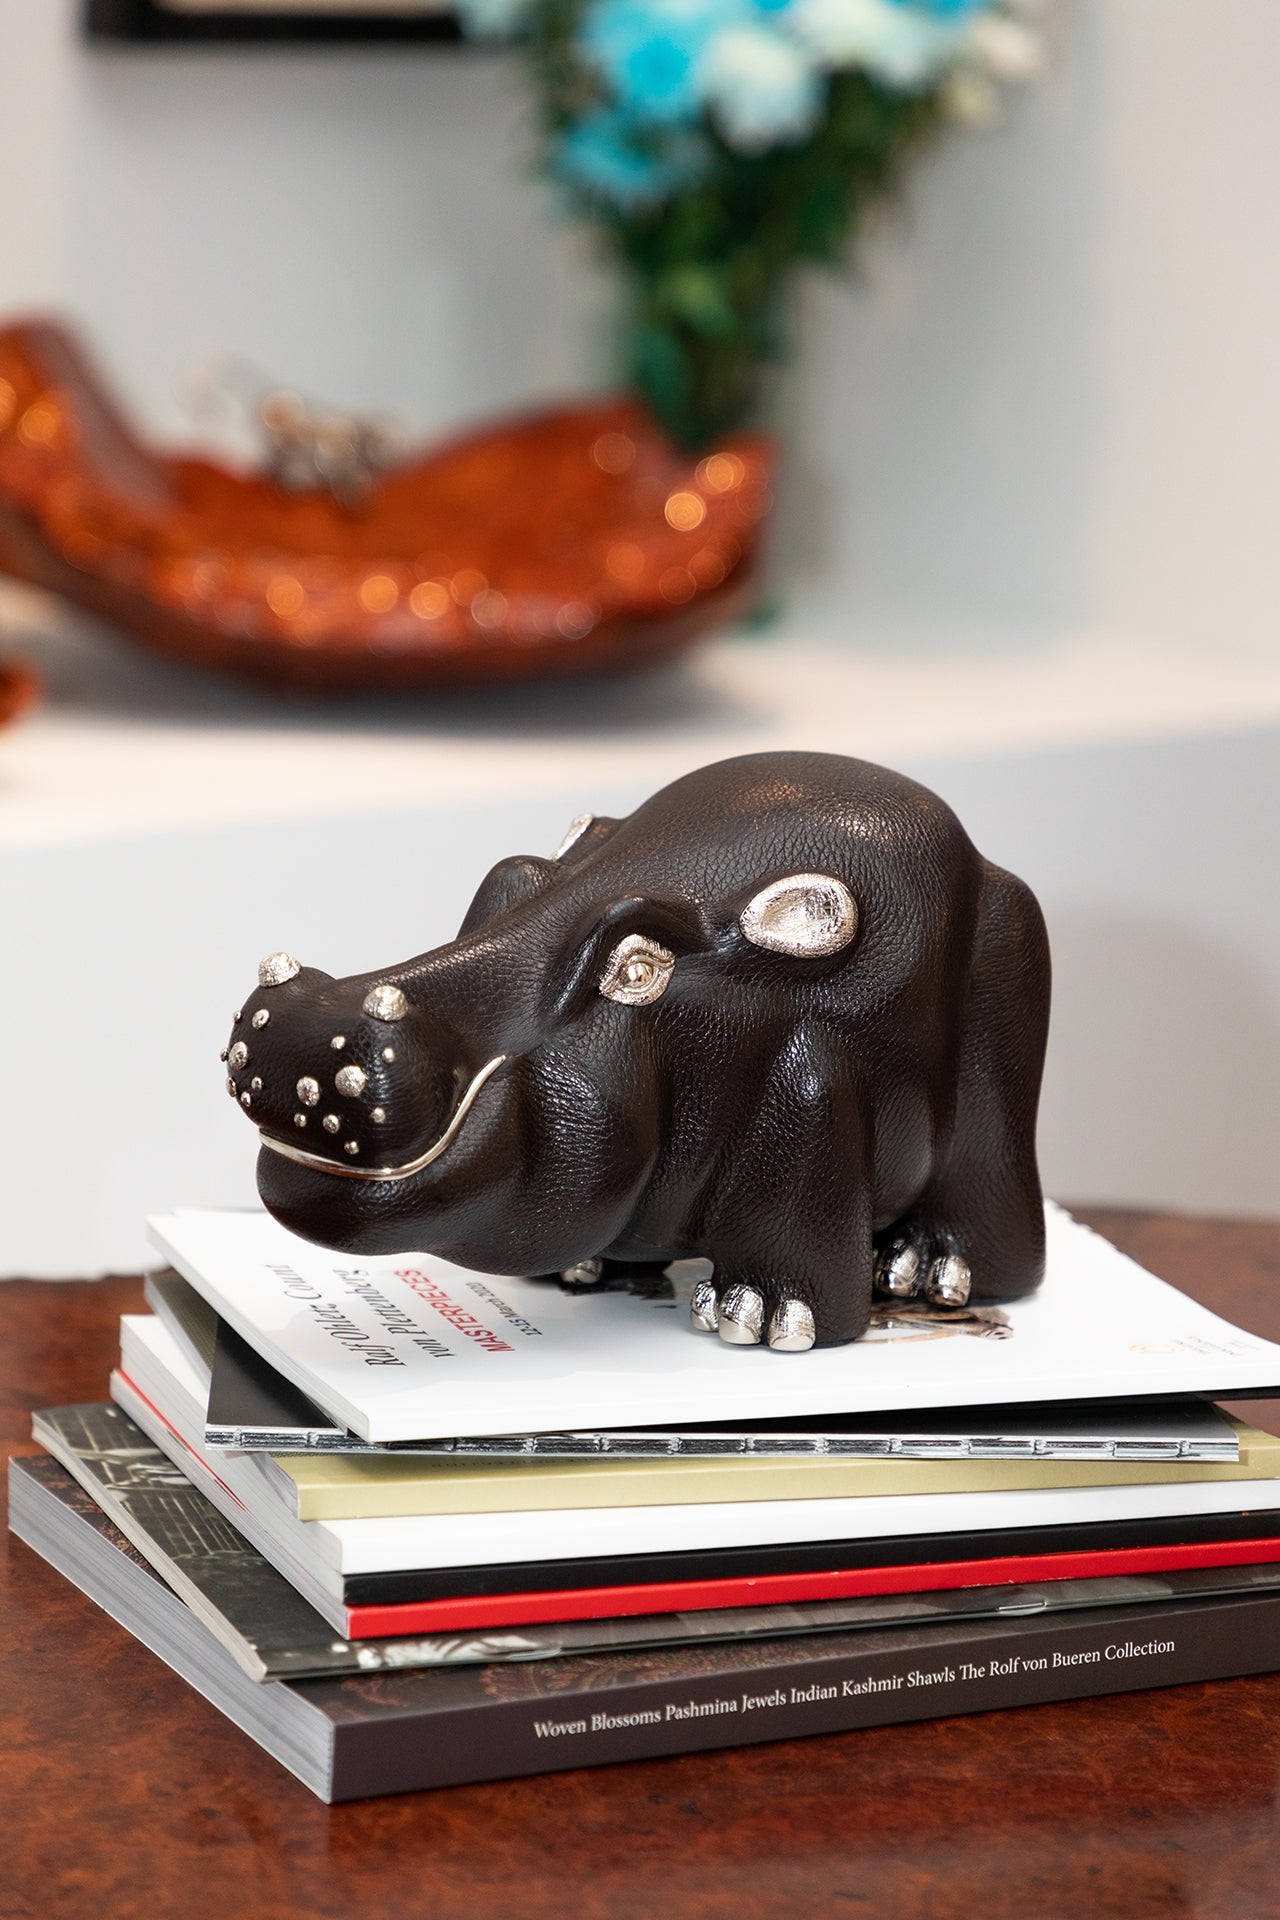 Hippo Paperweight / Bookend